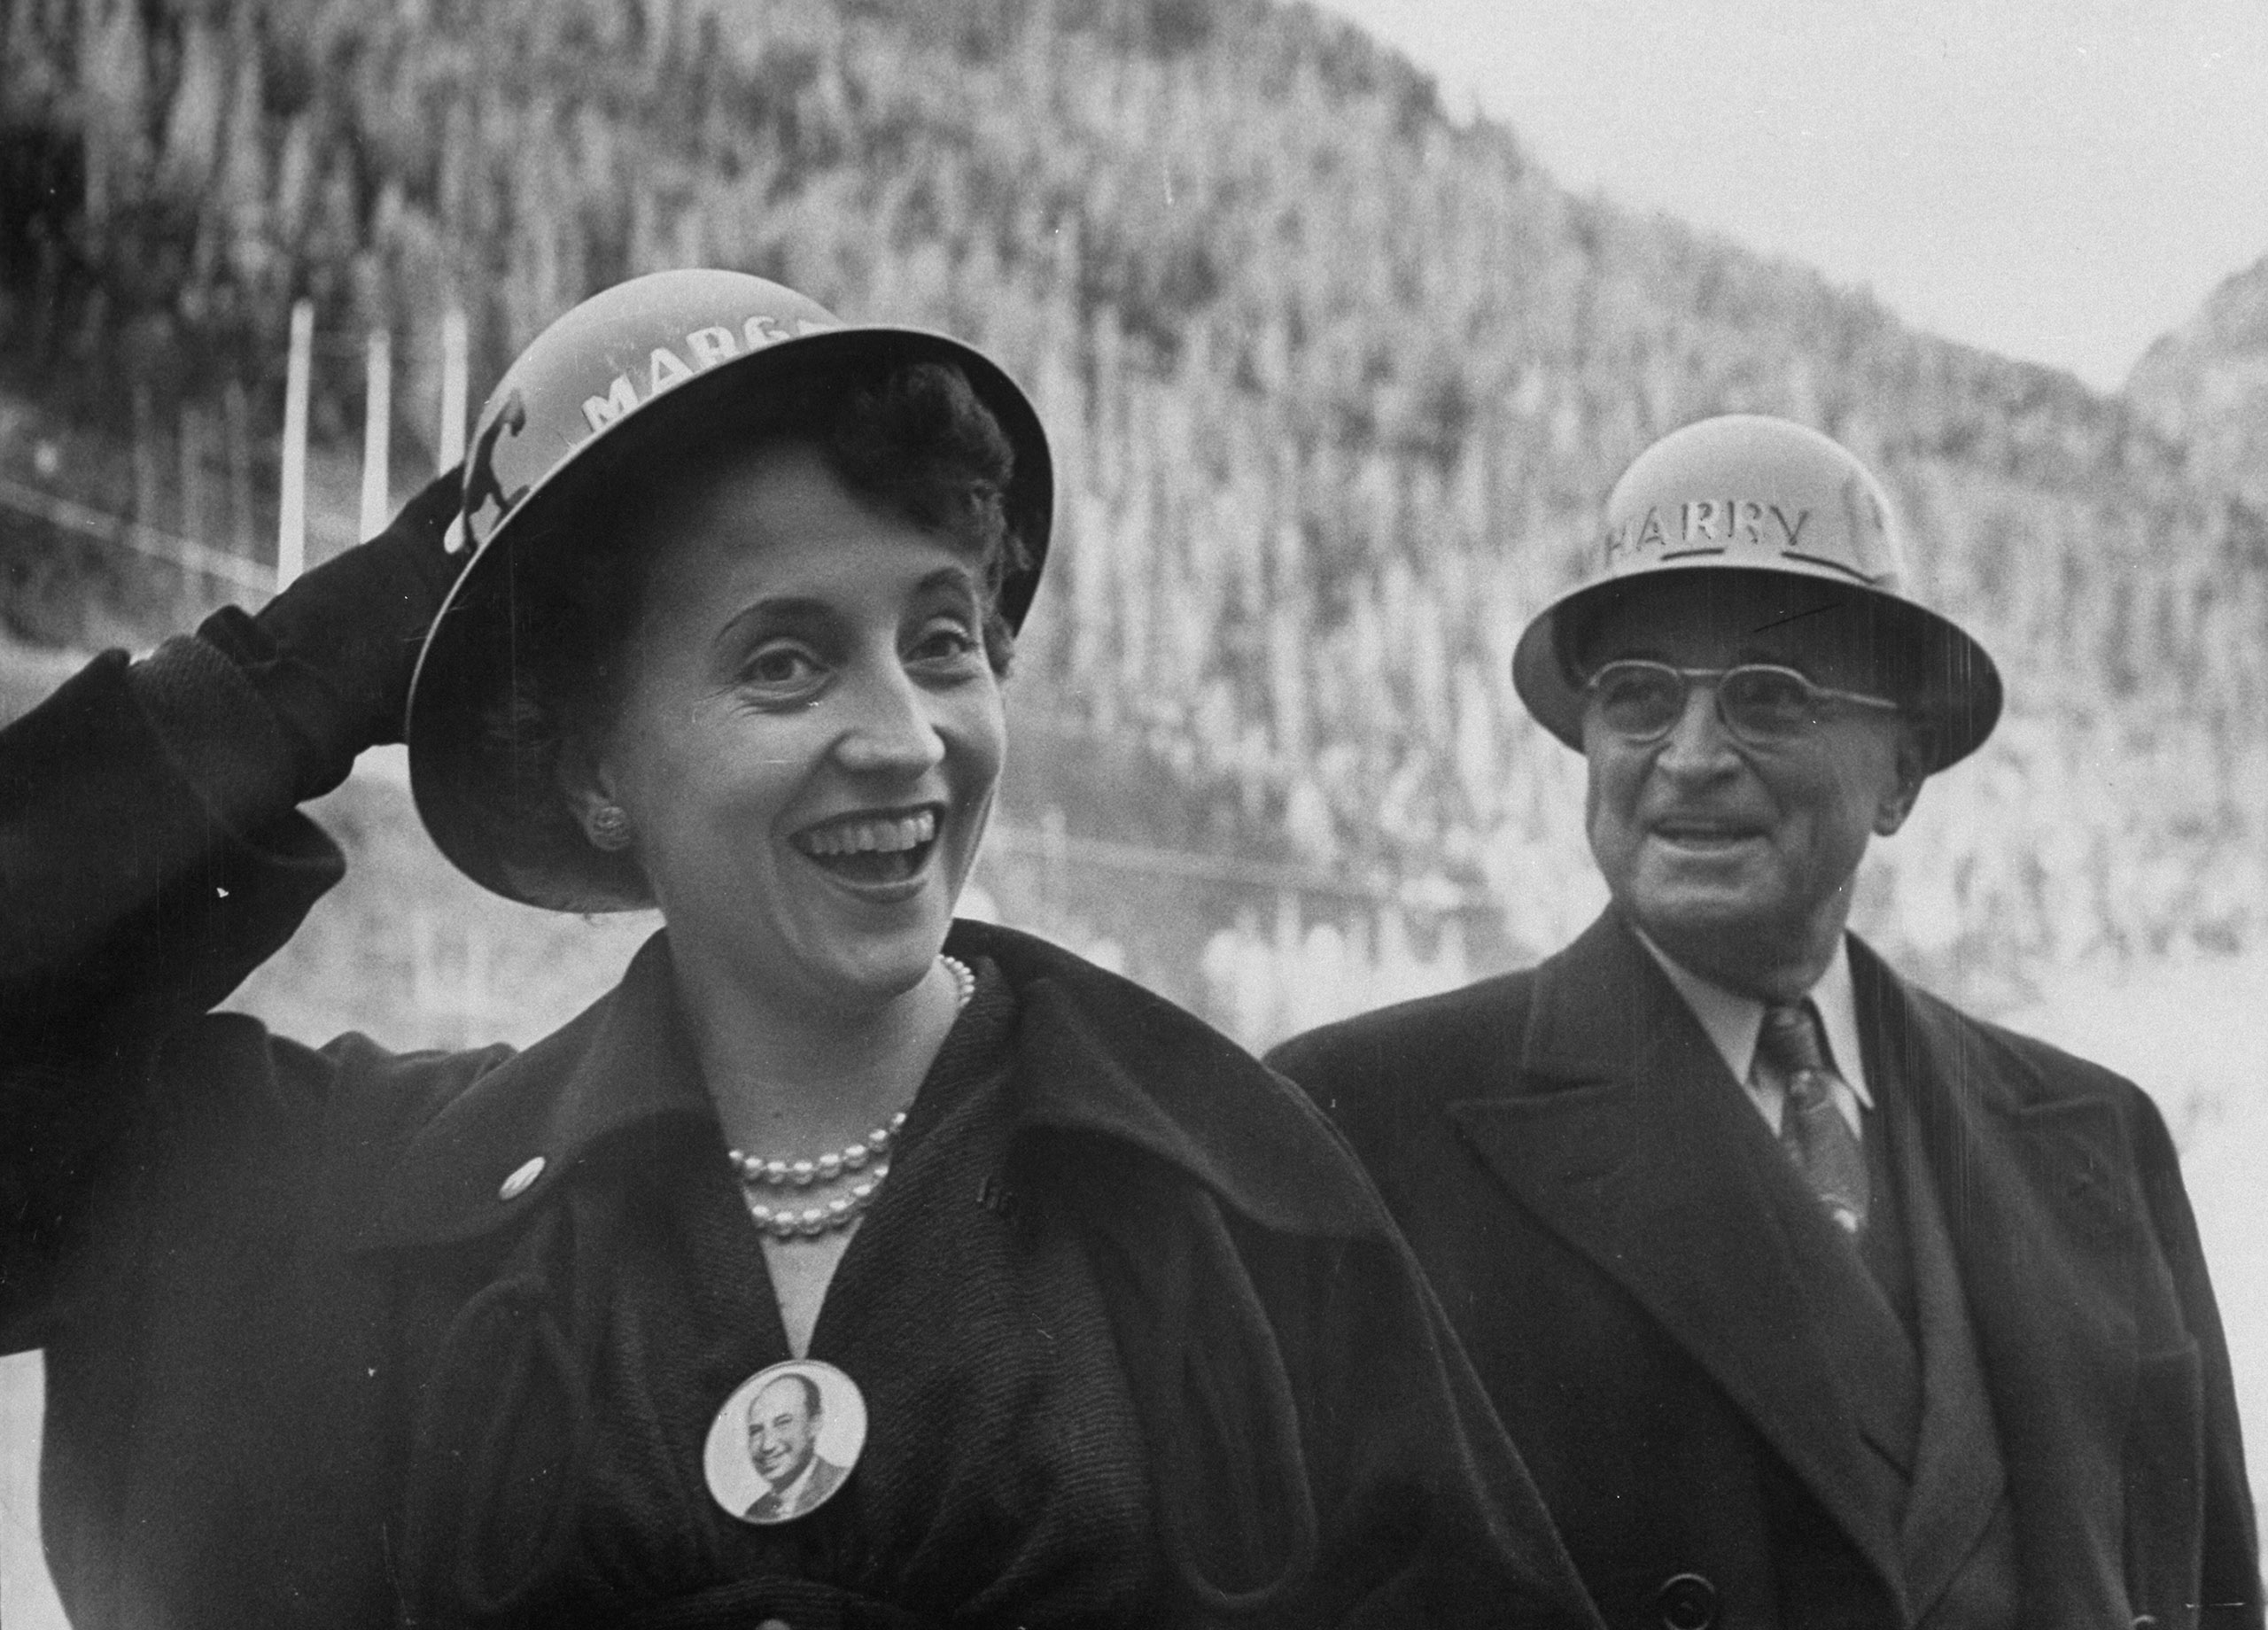 Harry S. Truman: Margaret Truman, left, the only child of Harry and Bess, pursued a career as a singer during the period her father served as President. Later in life, she enjoyed a successful career as a writer of murder mysteries, historical works and biographies of her parents. In the 1952 photo above, she joins her father in Kalispell, Mont., where he had been invited to throw a ceremonial switch, marking the start-up of the Hungry Horse Dam.